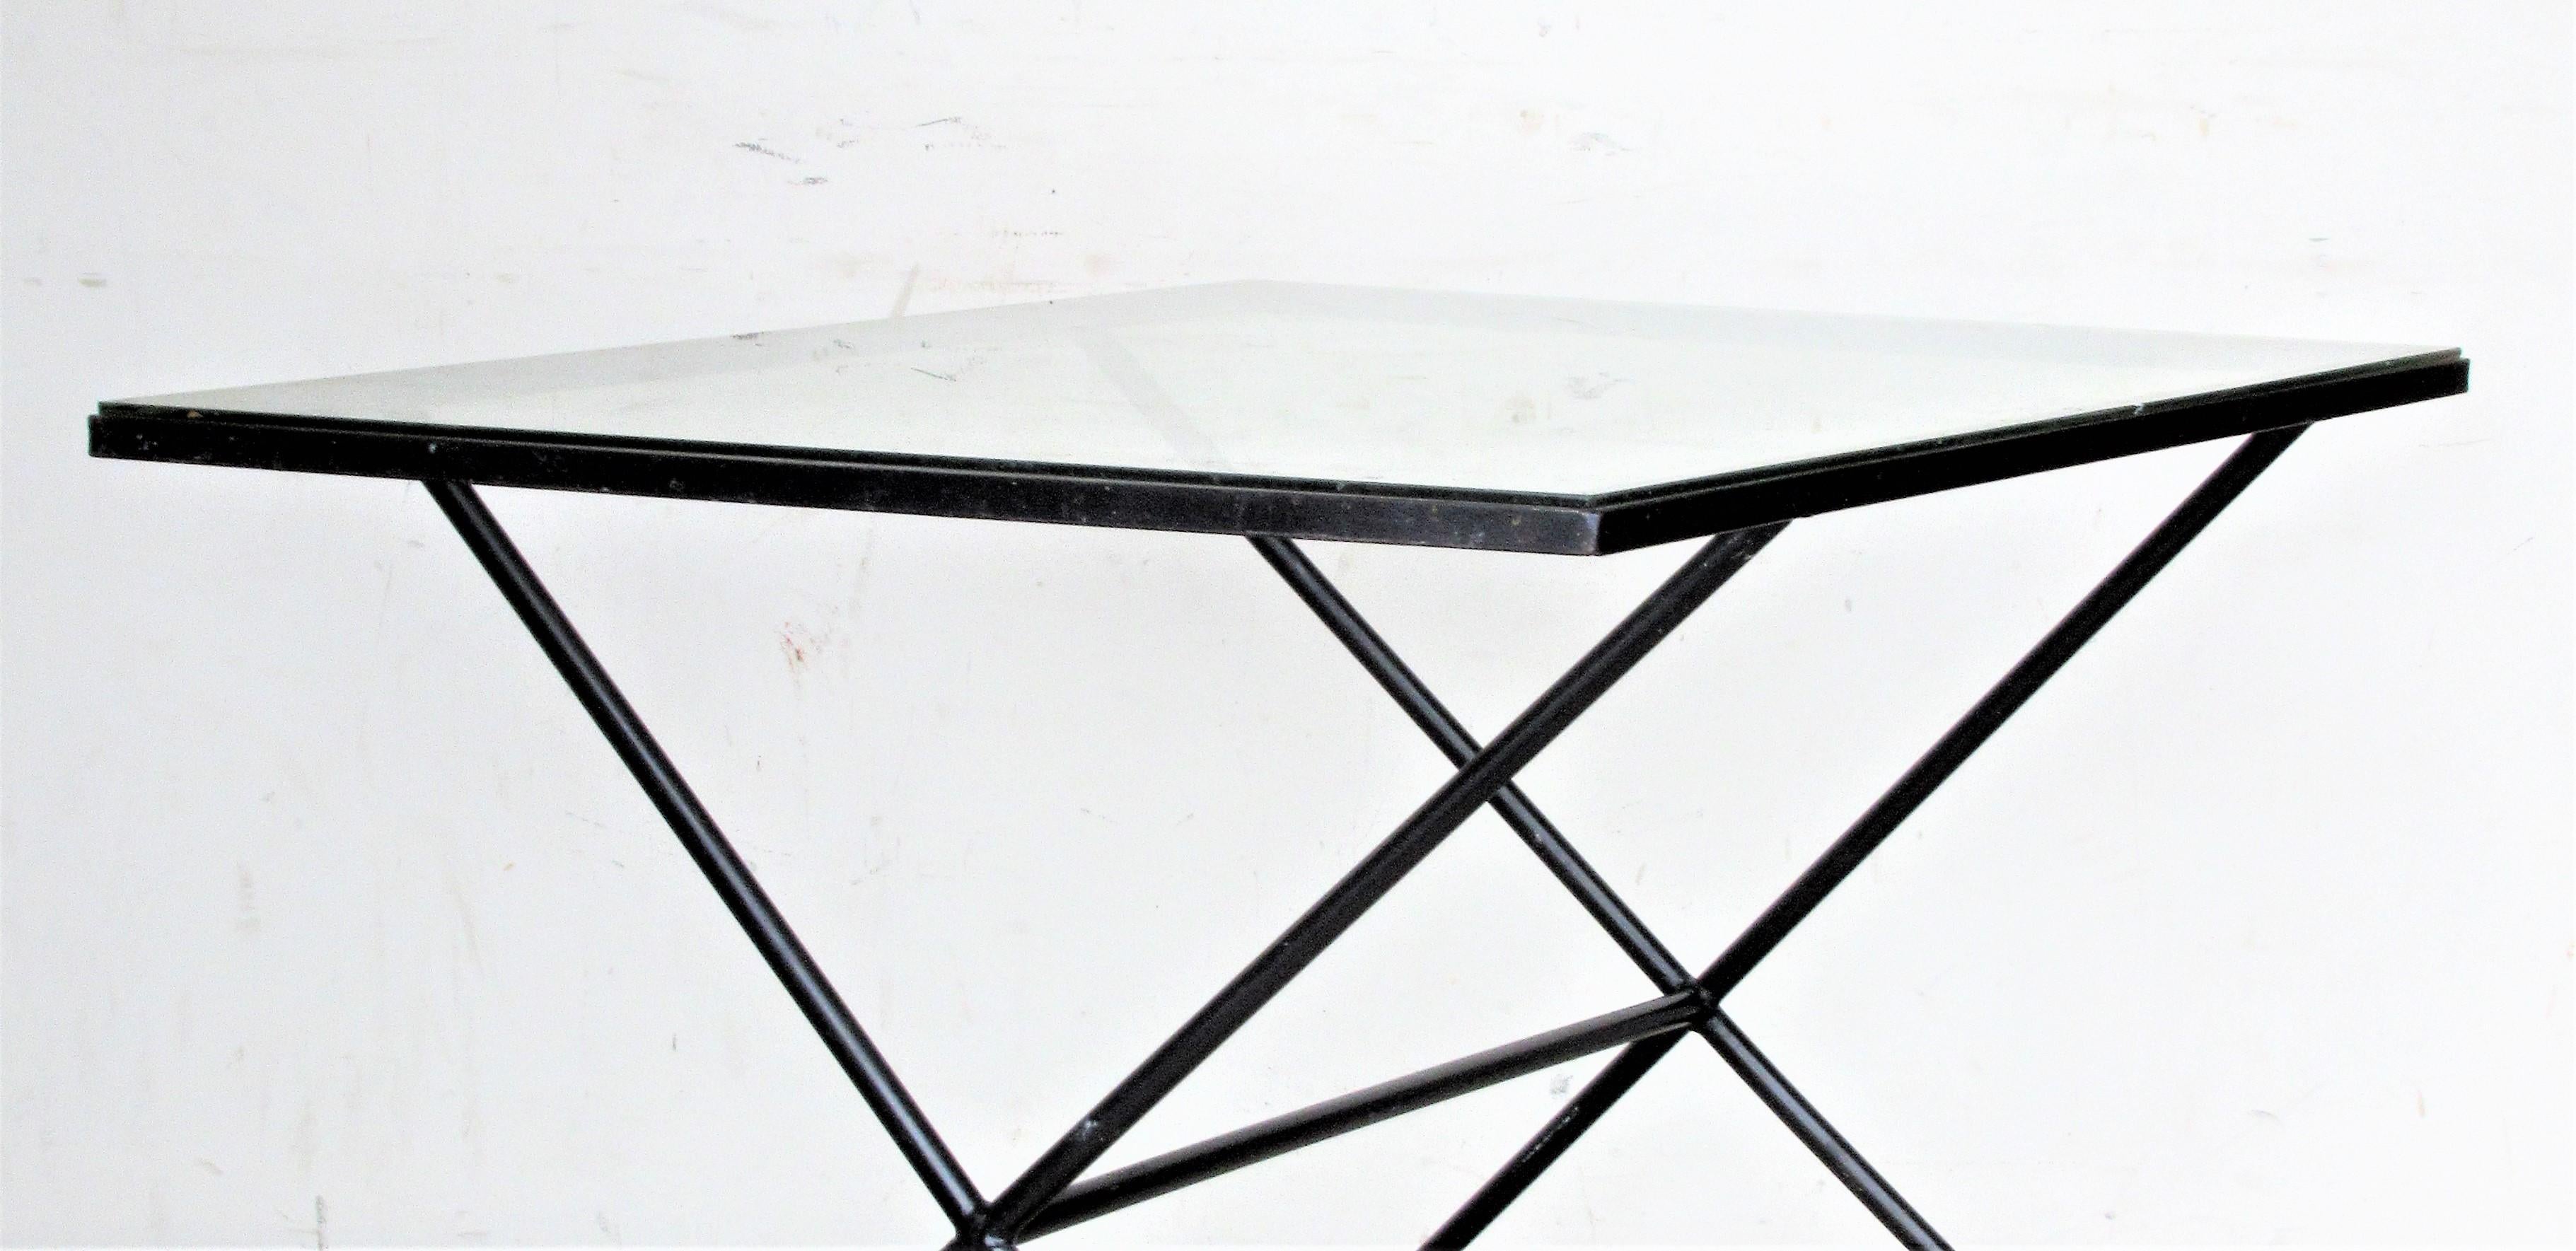  Architectural Modernist Iron Table by Muriel Coleman 6